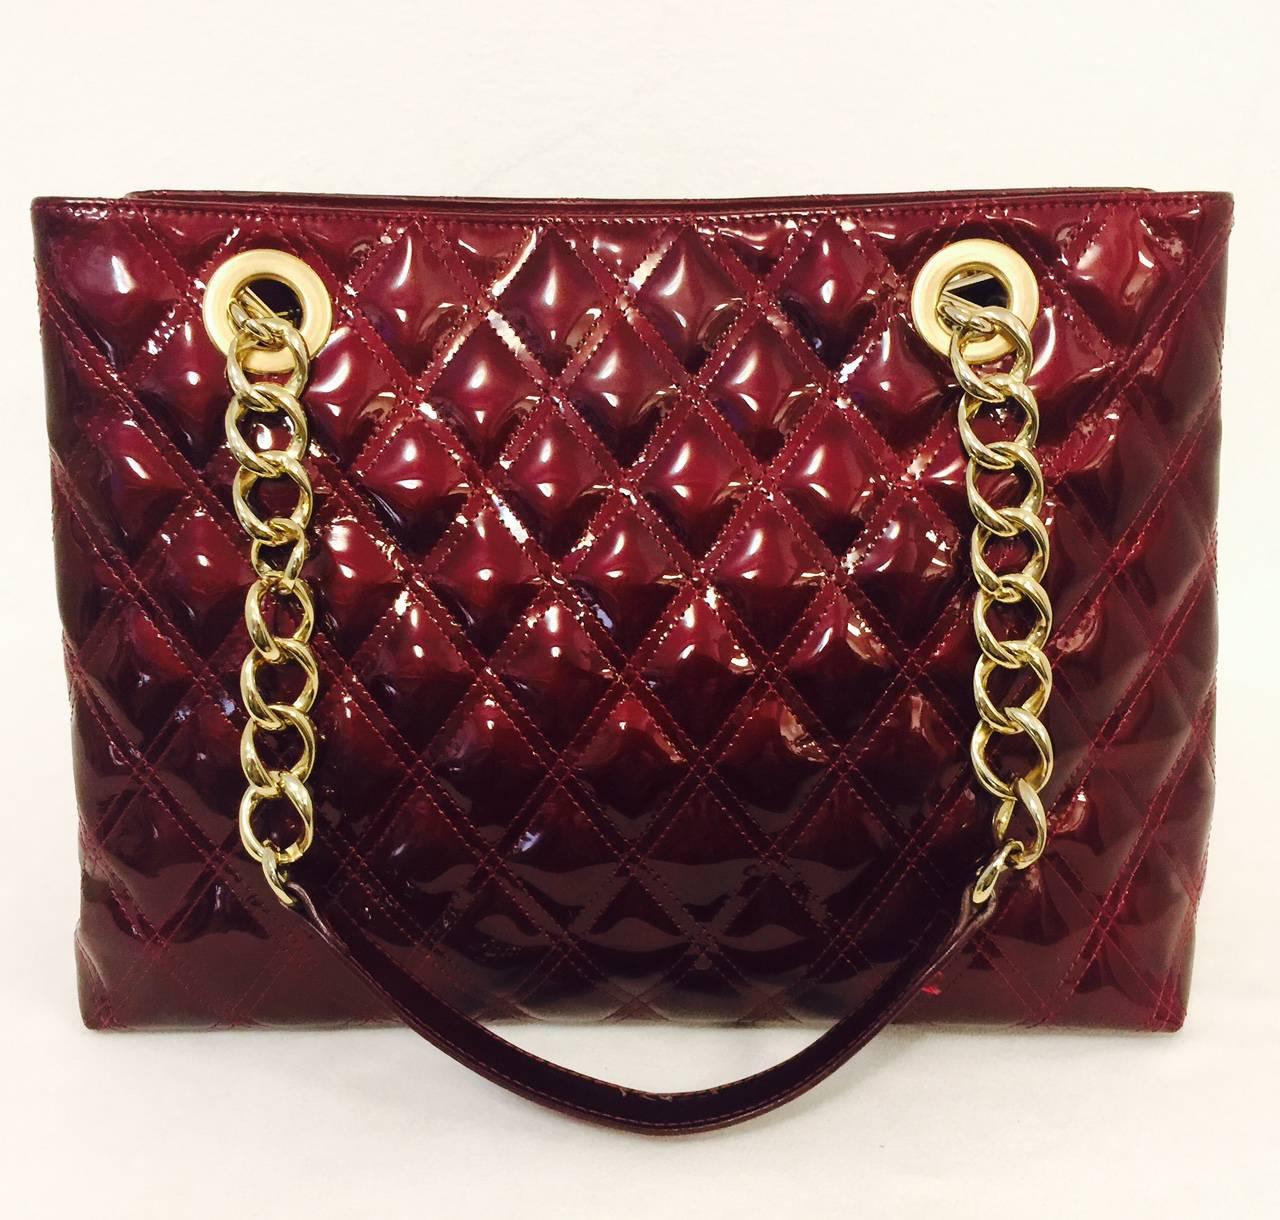 Stuart Weitzman is so much more than shoes!  This Cherry Diamond Quilted Iridescent Patent Leather Tote will quickly become a favored go-to carryall in town and country.  Features gold tone chains with smooth cherry shoulder straps.  Open top with